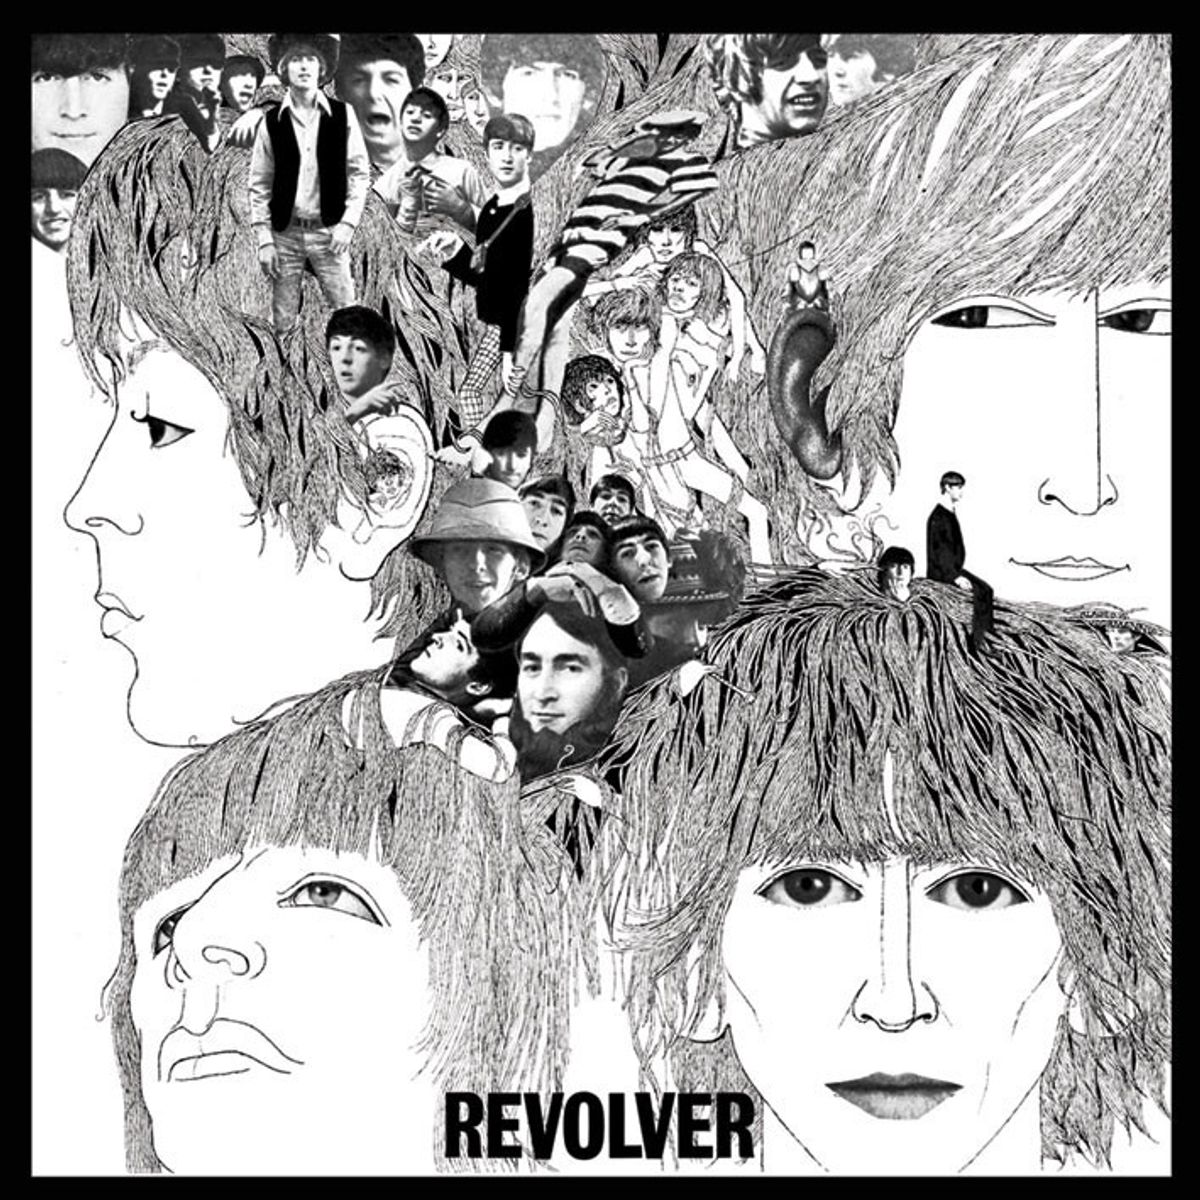 #DeAfsluiter - The Beatles - Tomorrow Never Knows (1966)